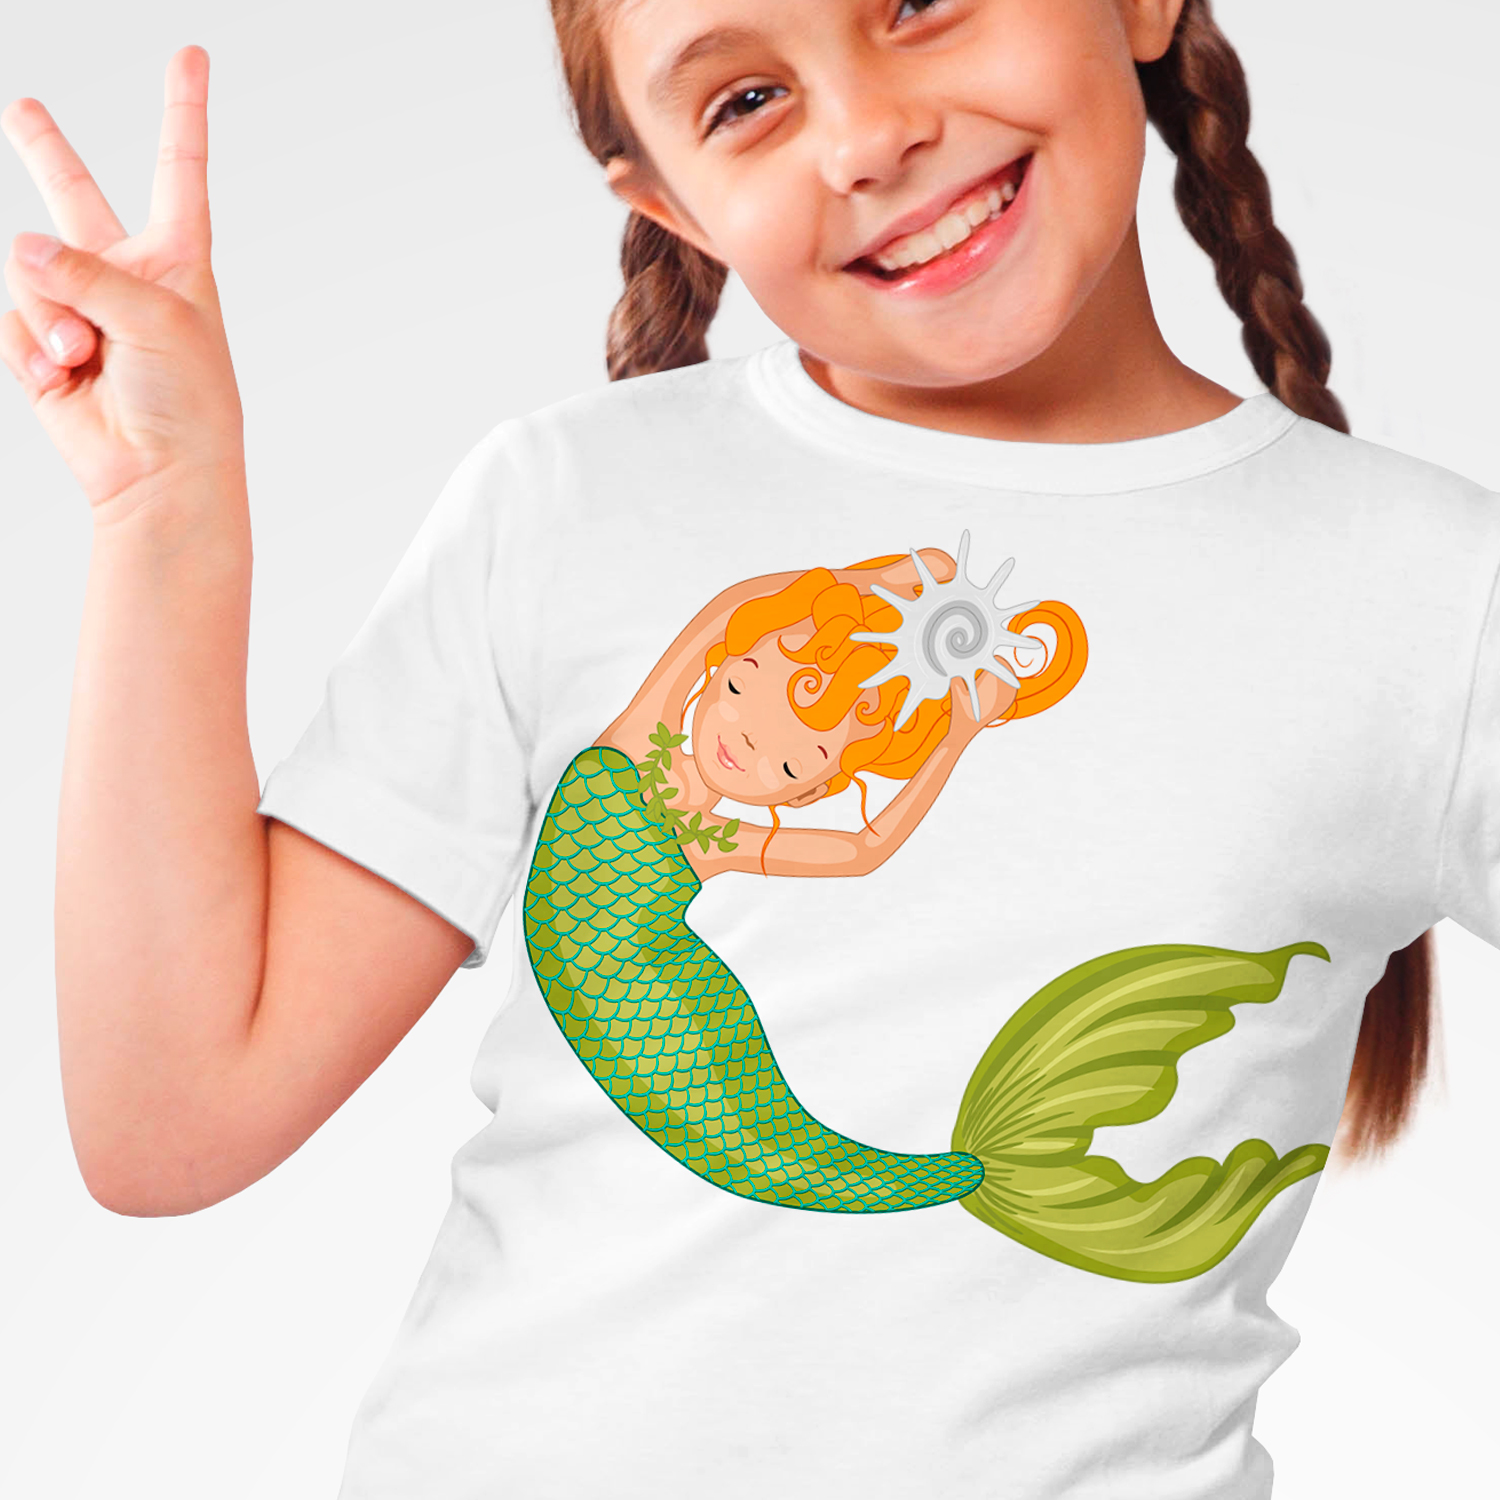 A beautiful print on a t-shirt with a mermaid.